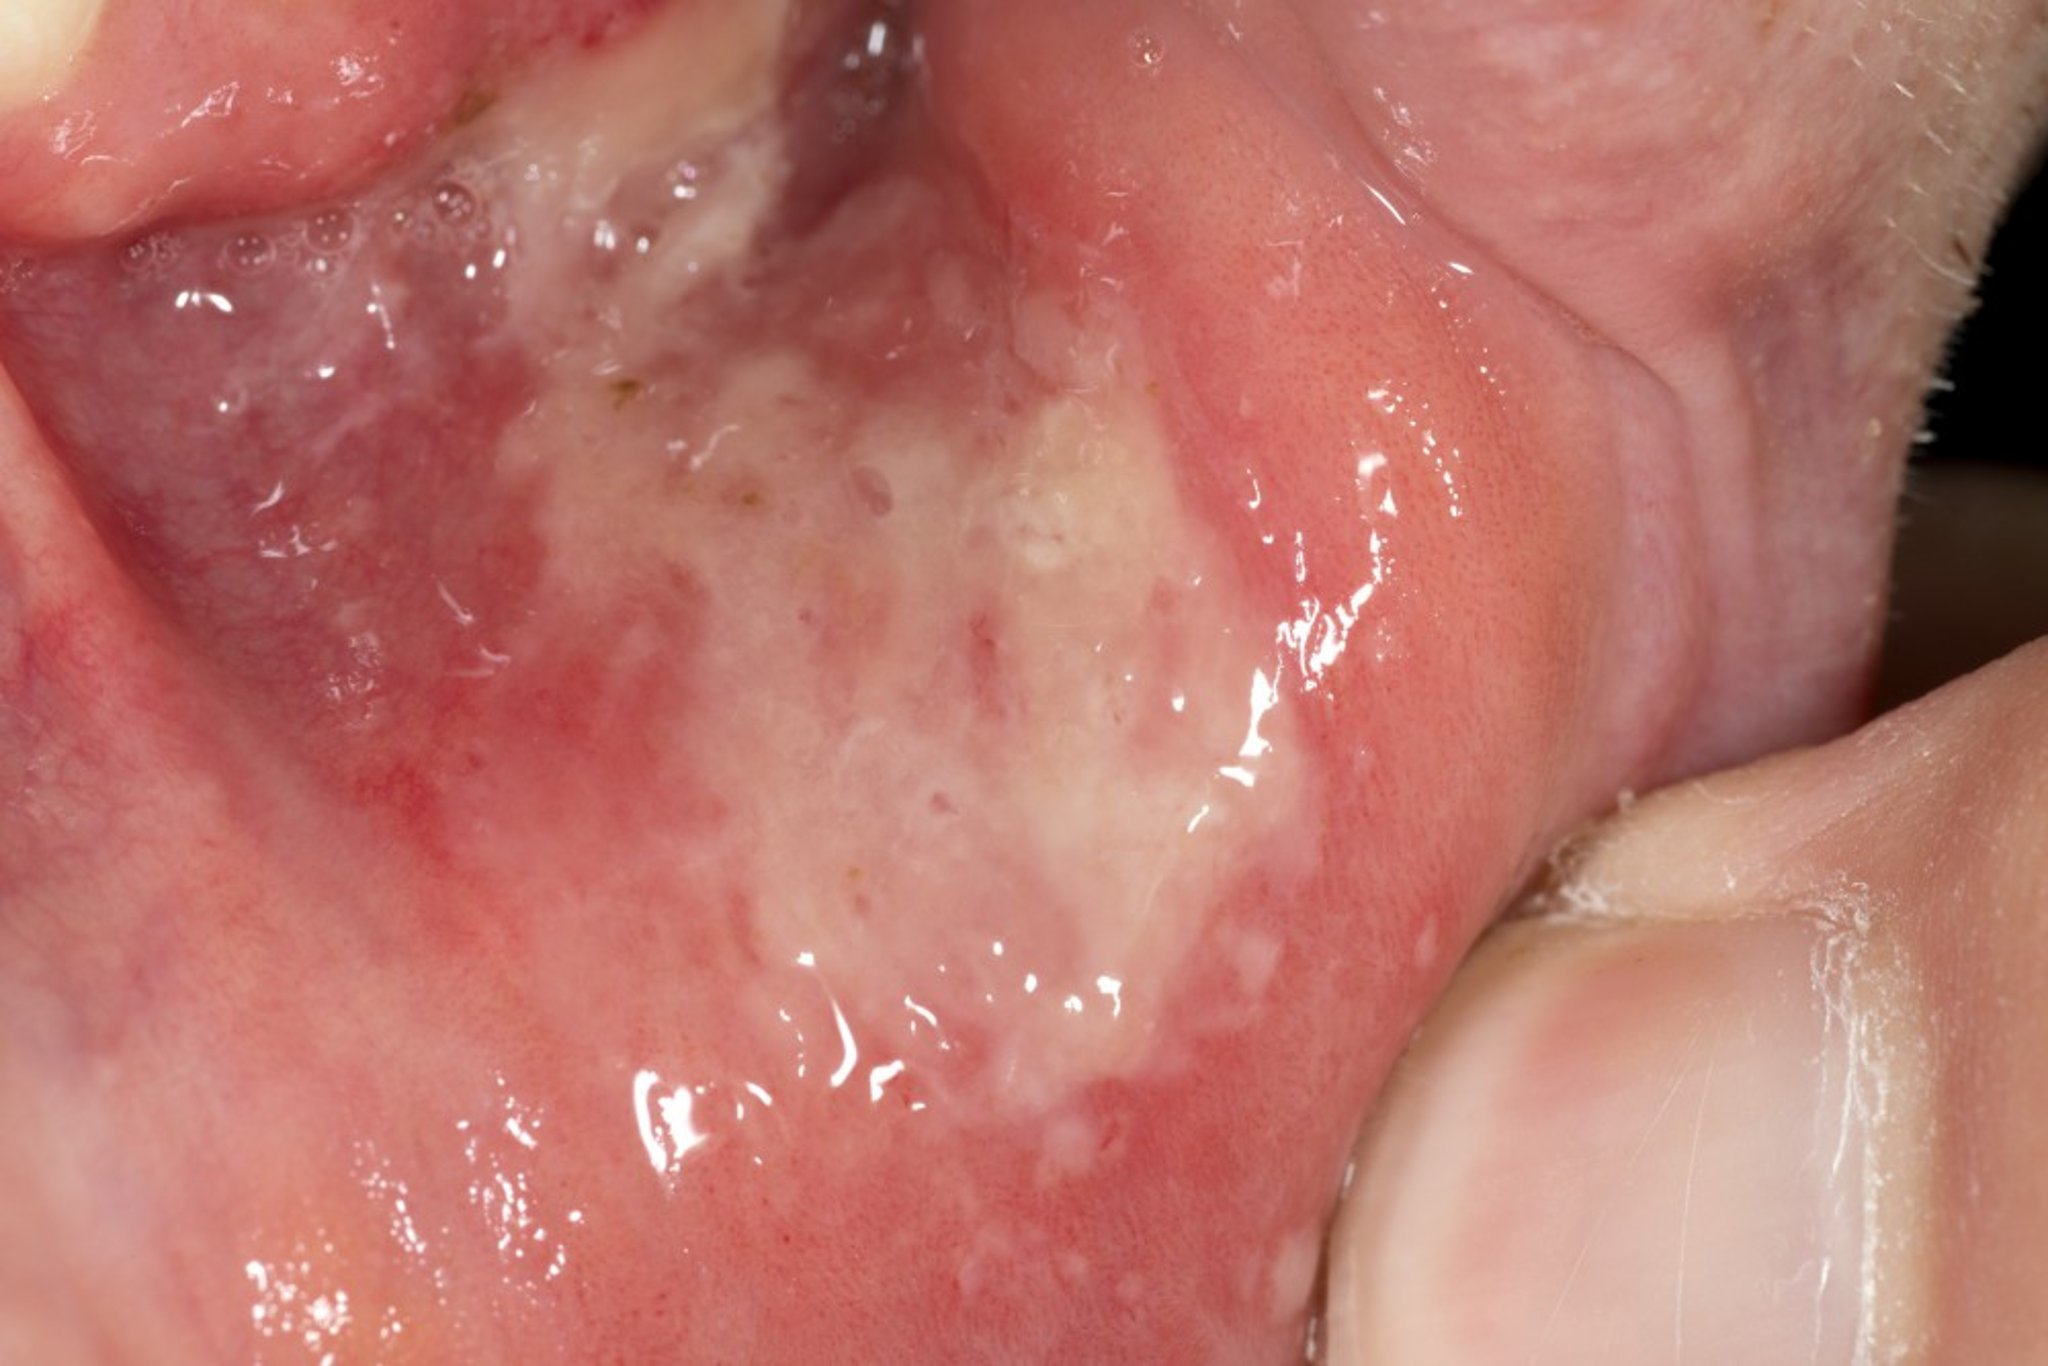 Major Aphthous Ulcer